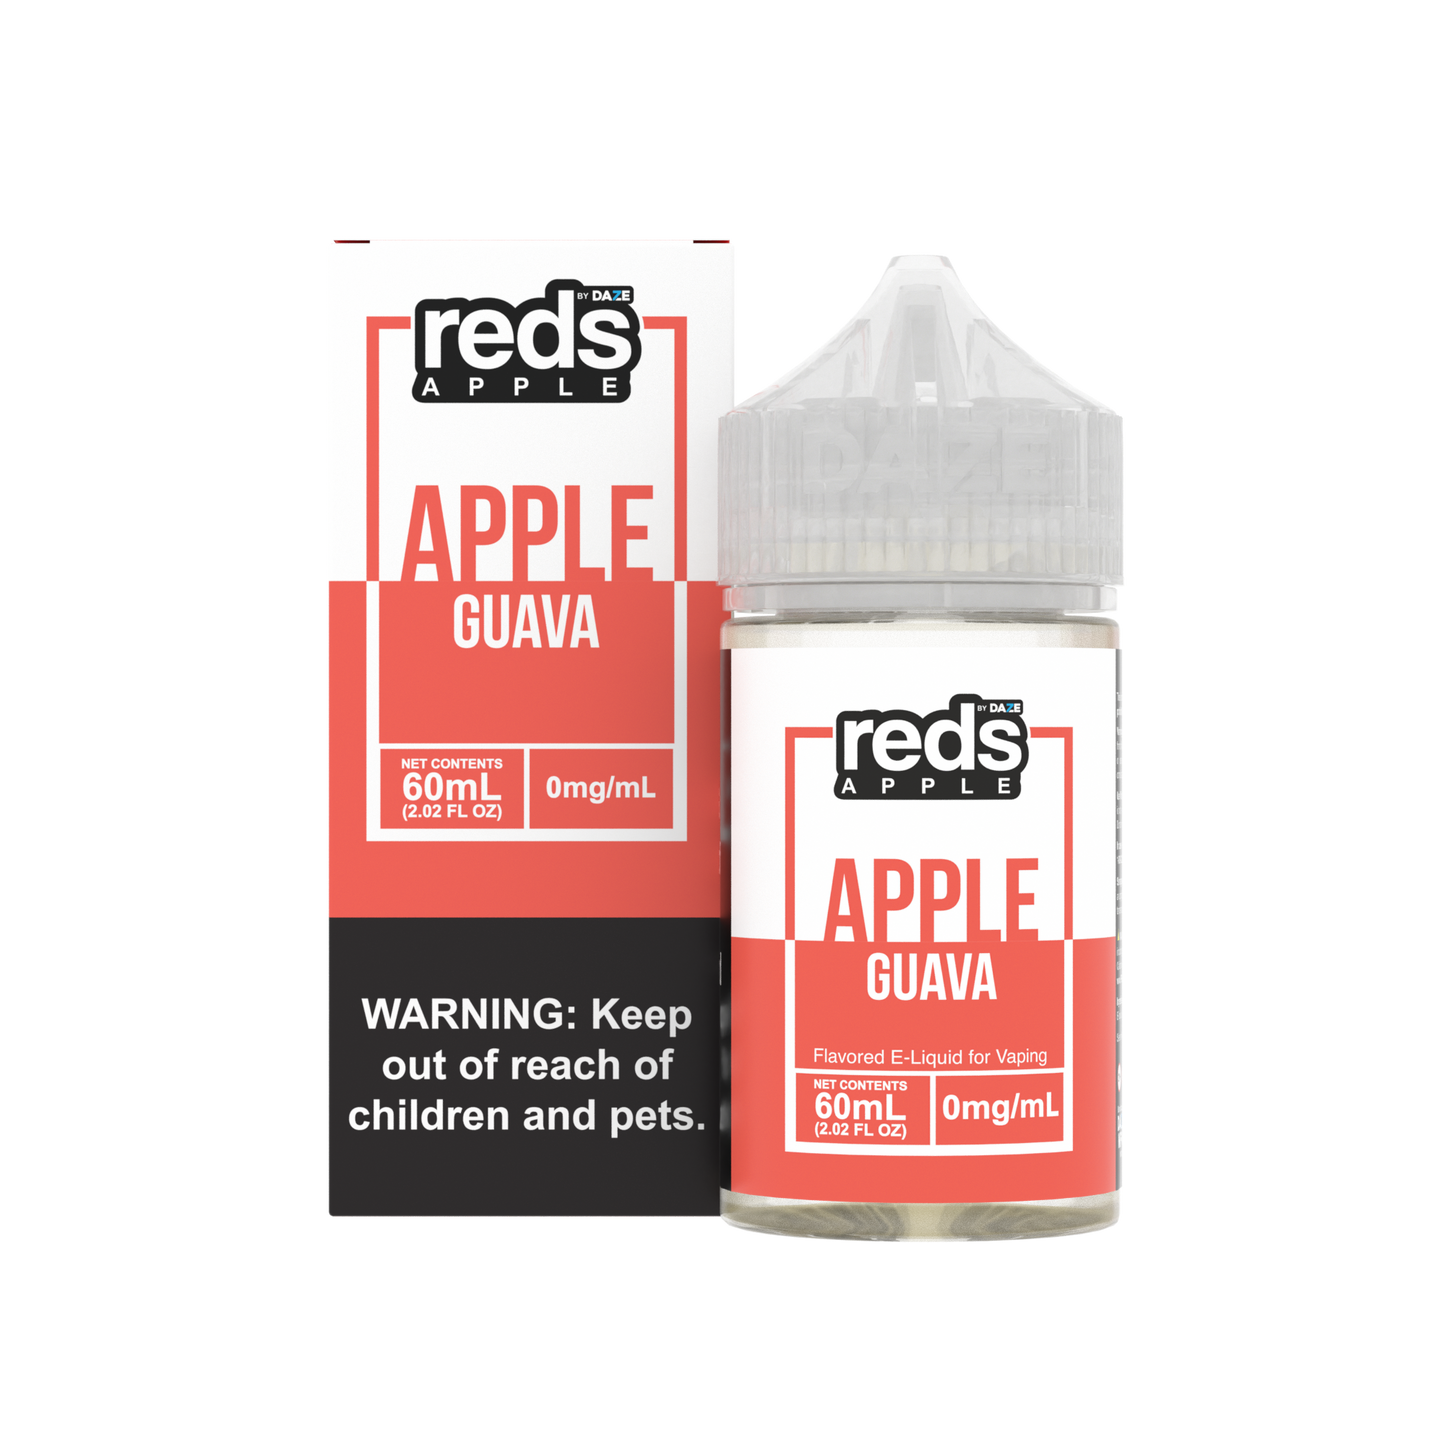 Reds: Apple Guava